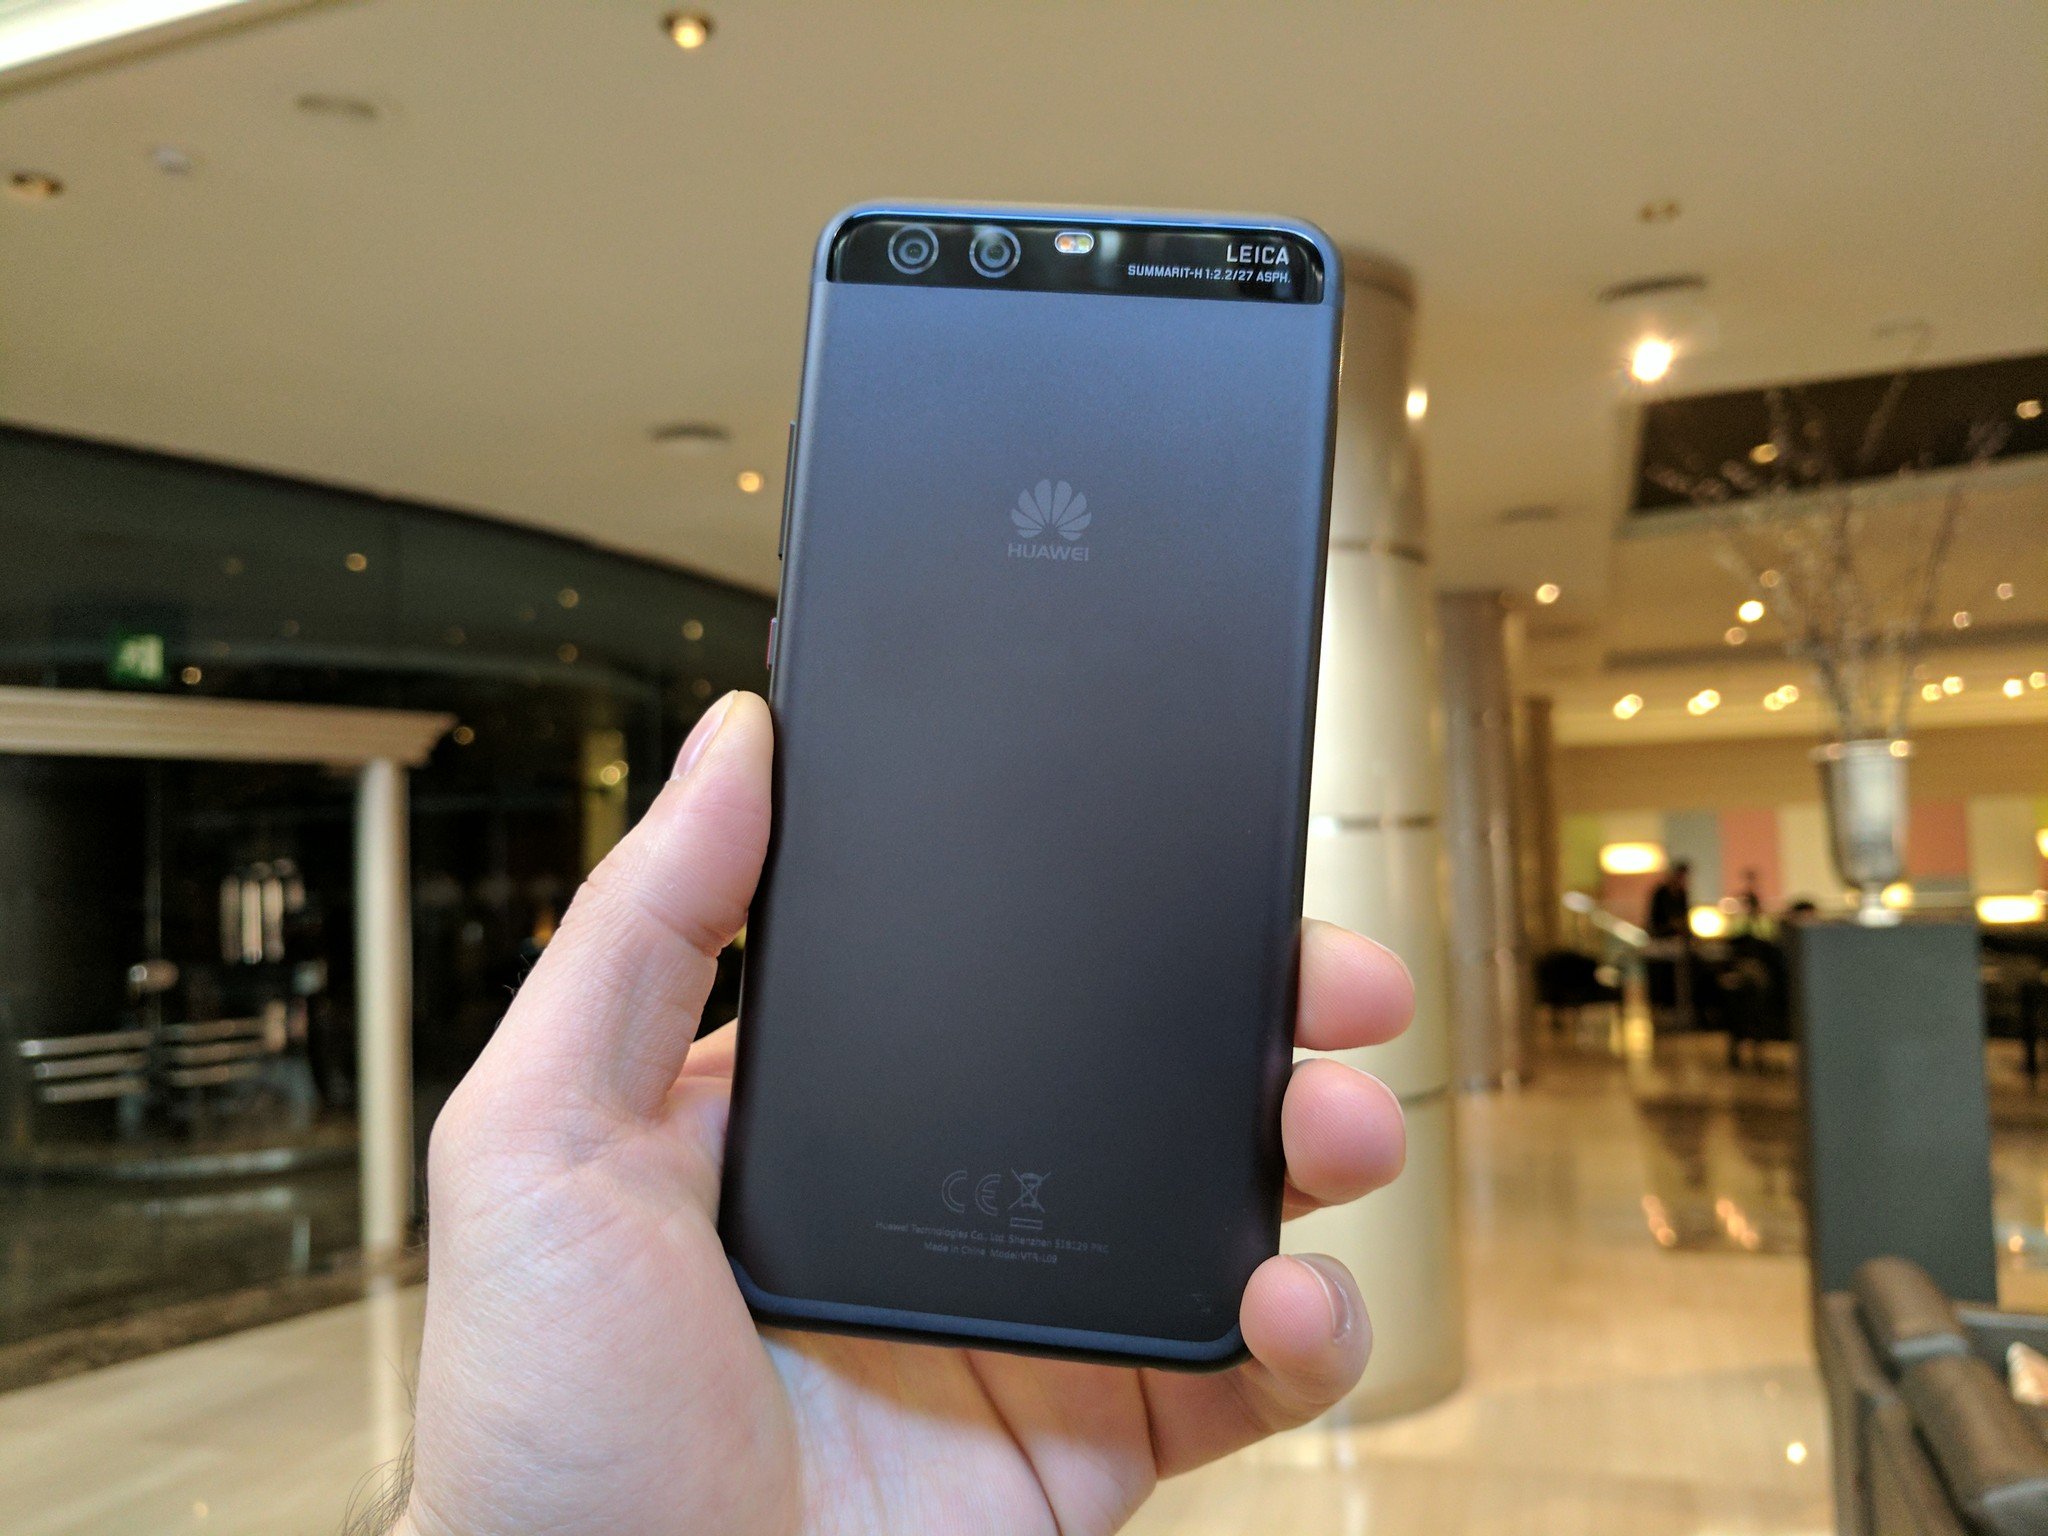 Huawei P10 P10 Plus specs | Android Central